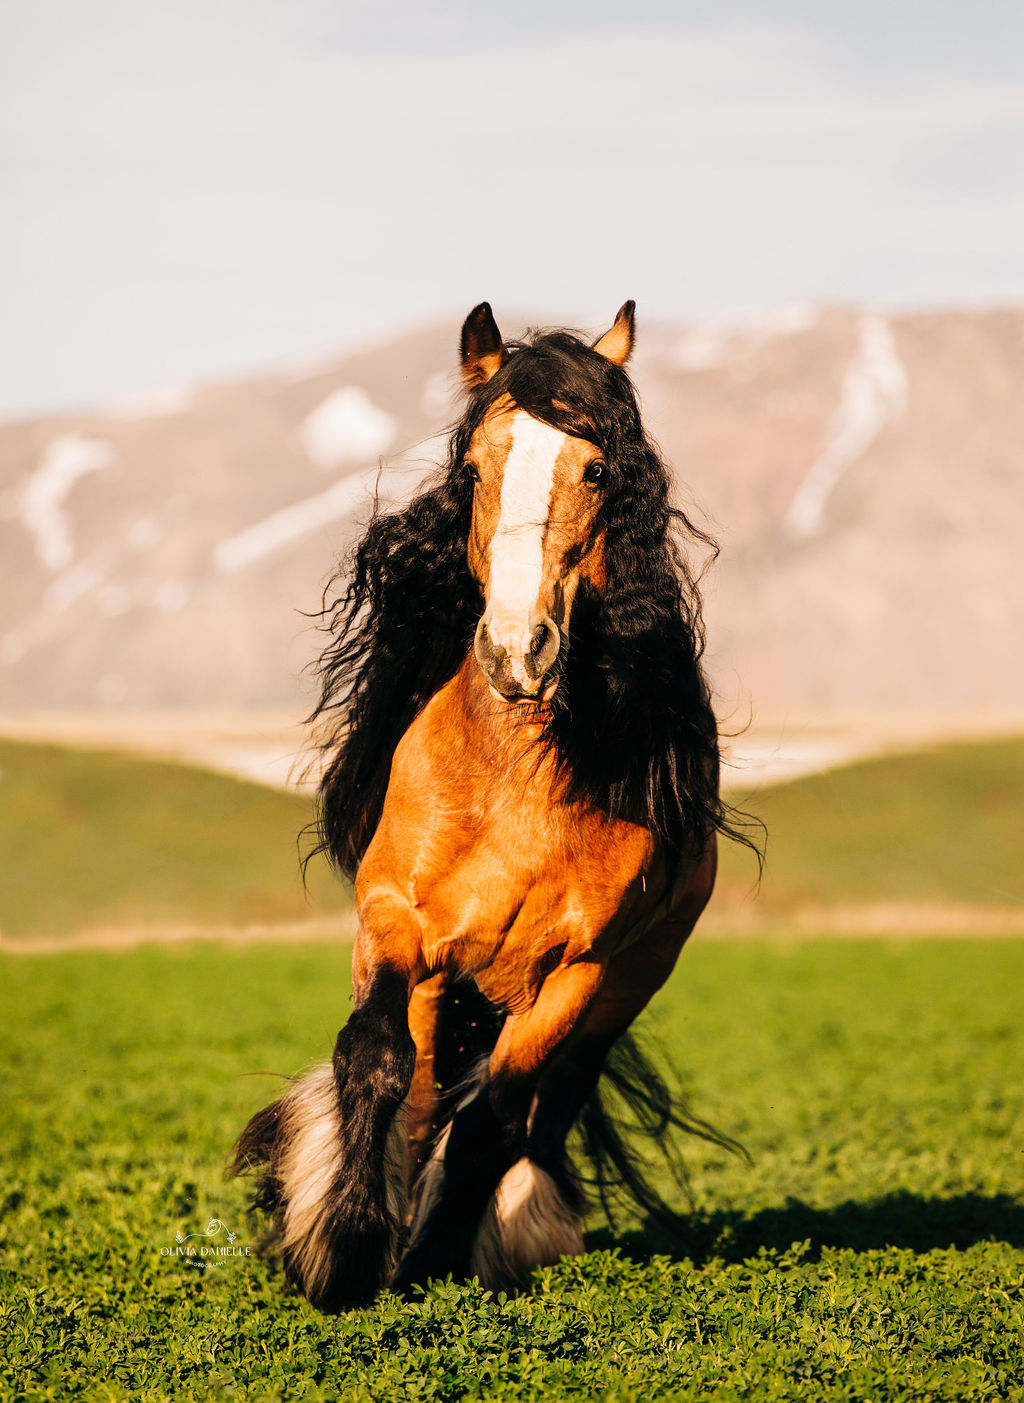 Horse running with mountains behind